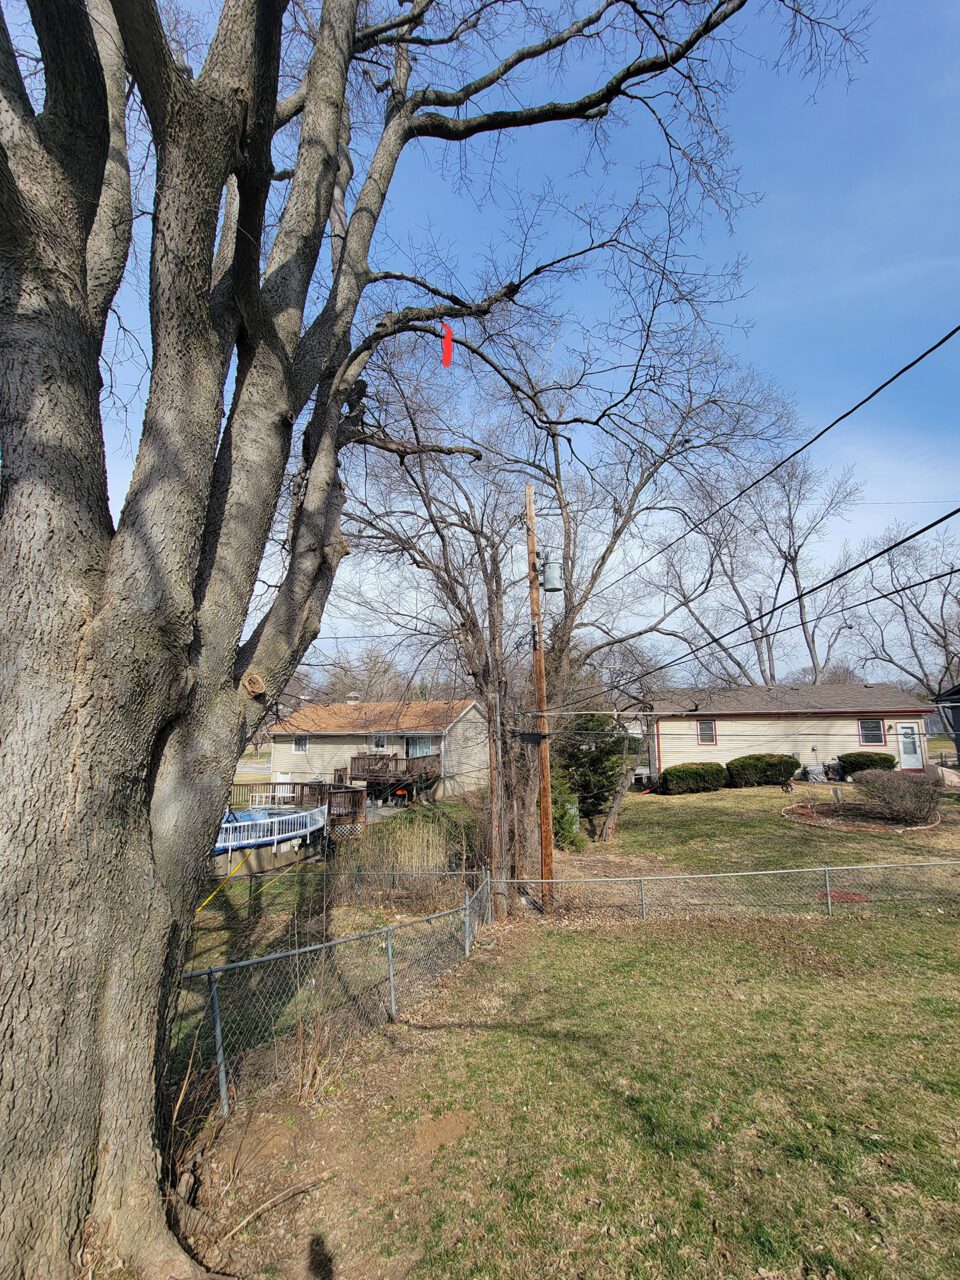 branch marked for removal after a tree inspection by an omaha certified arborist